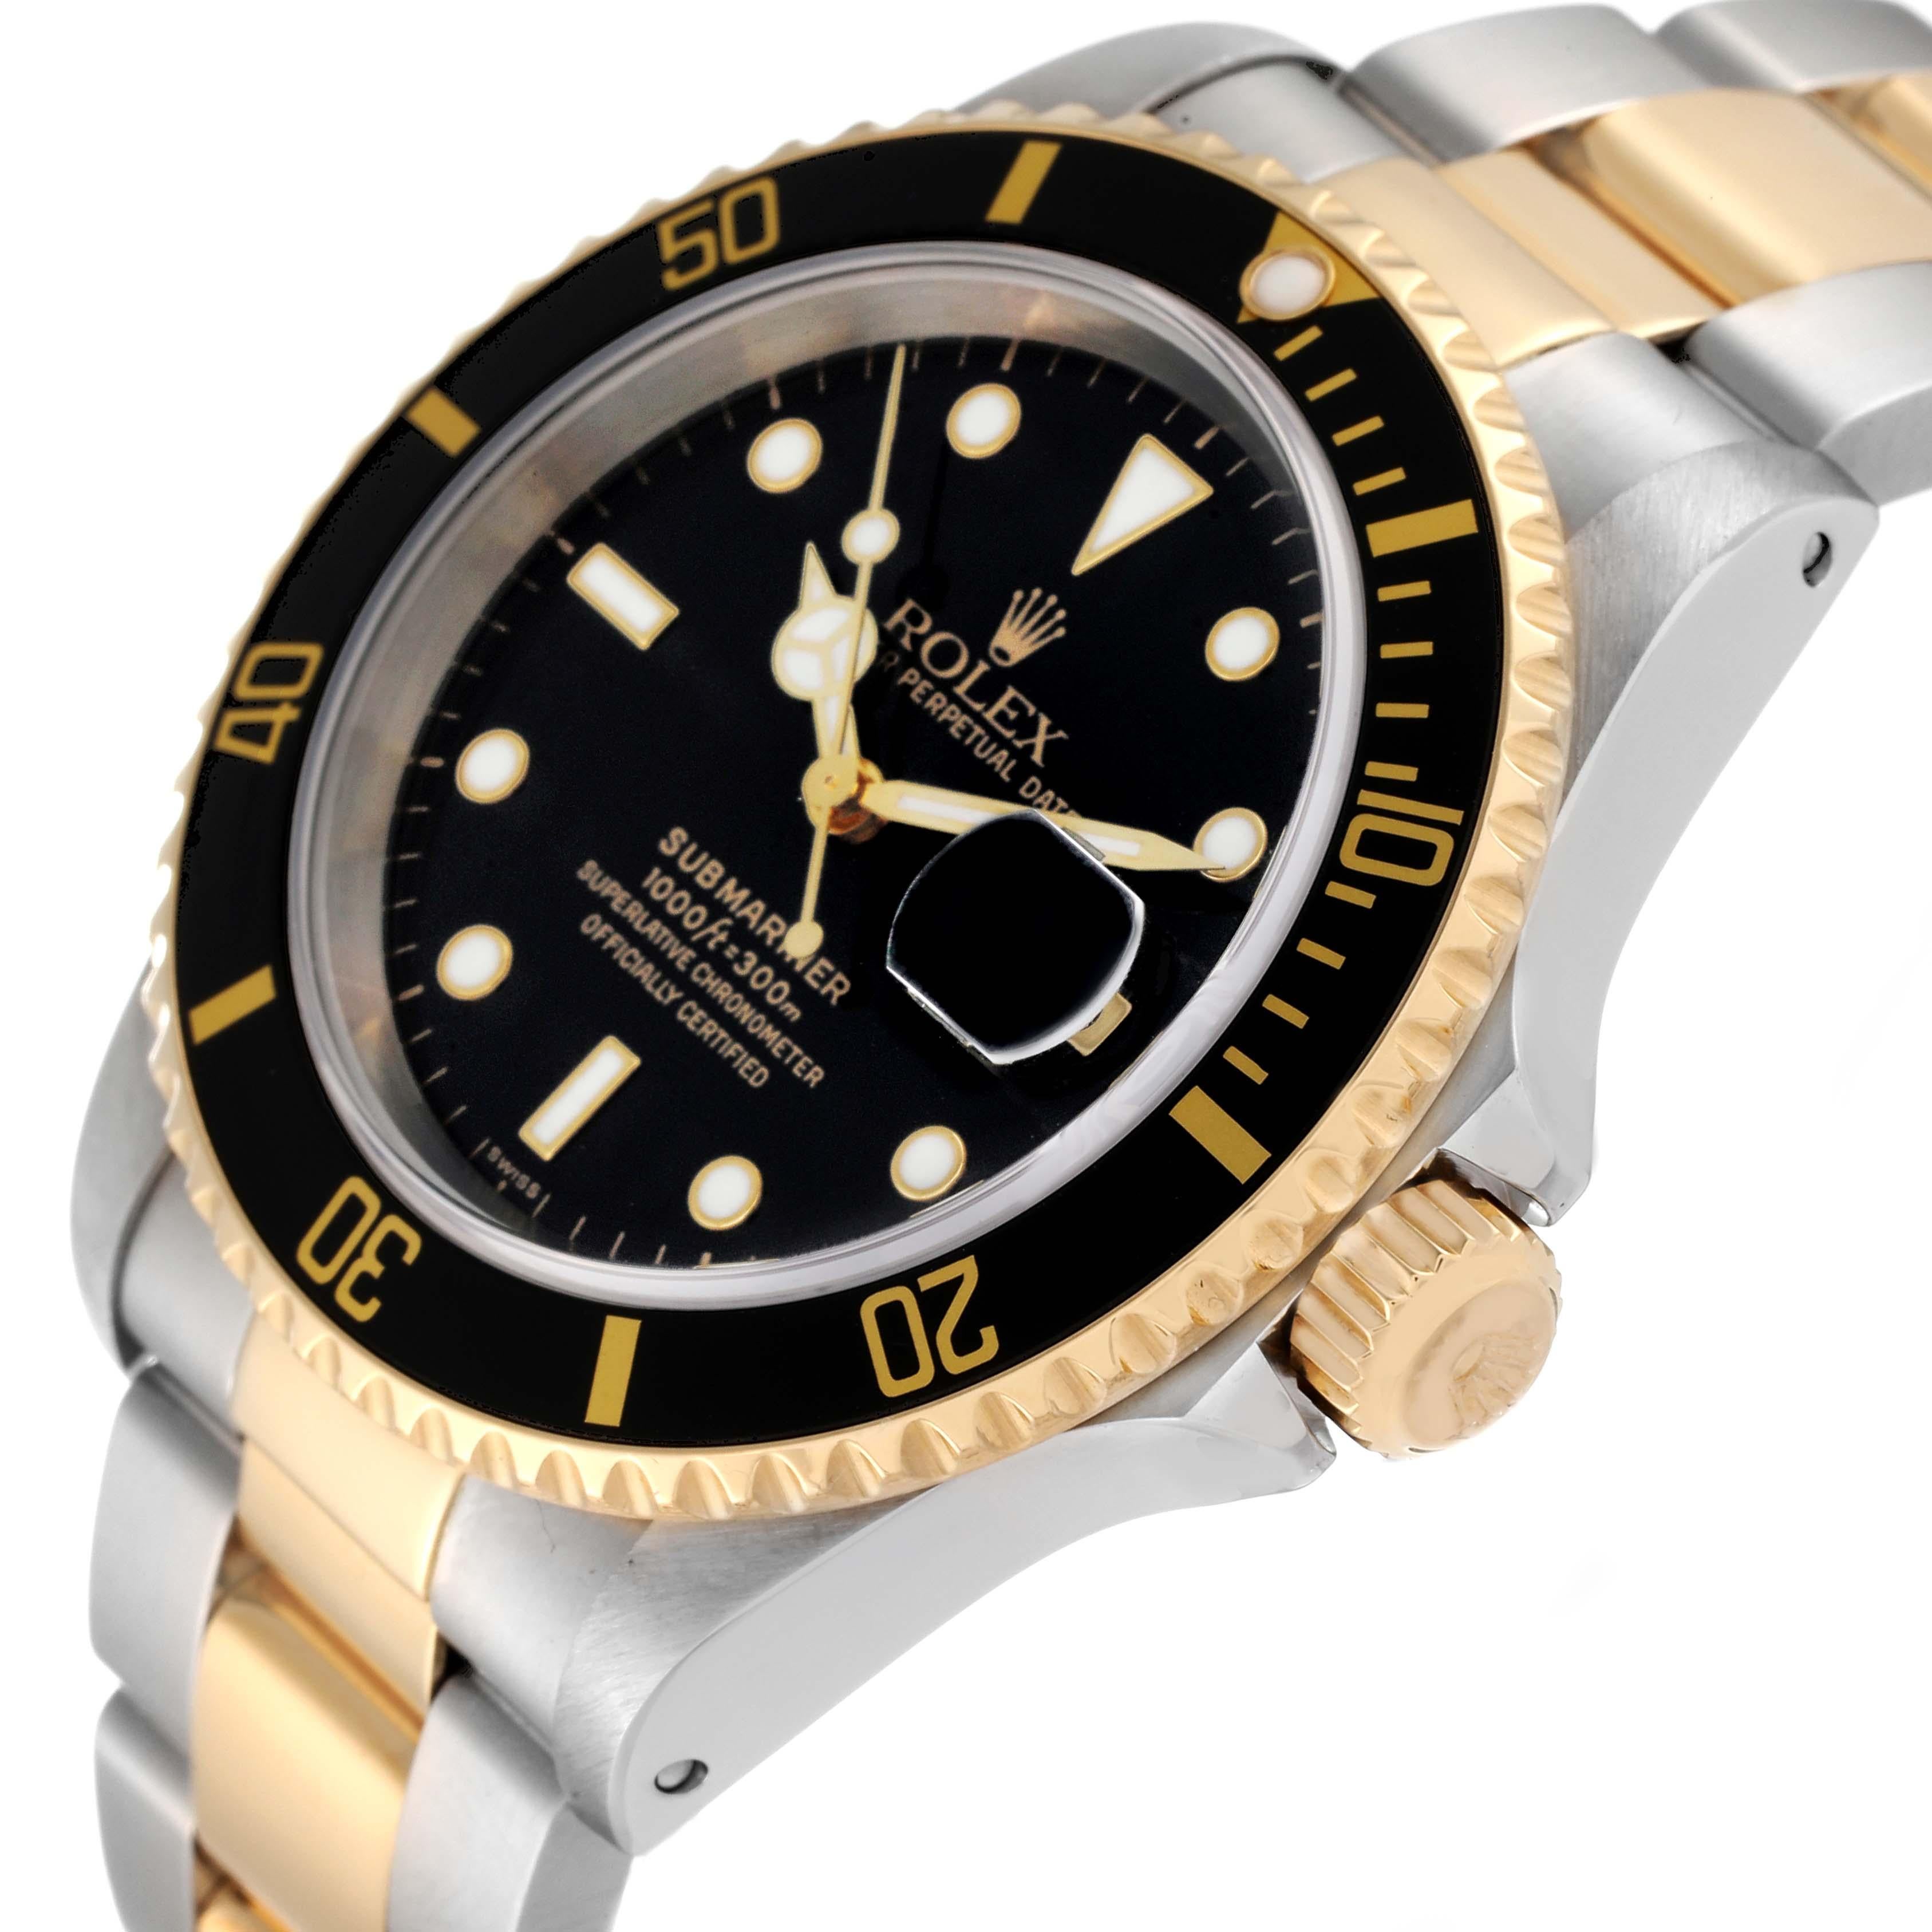 Men's Rolex Submariner Steel Yellow Gold Black Dial Mens Watch 16613 Box Papers For Sale